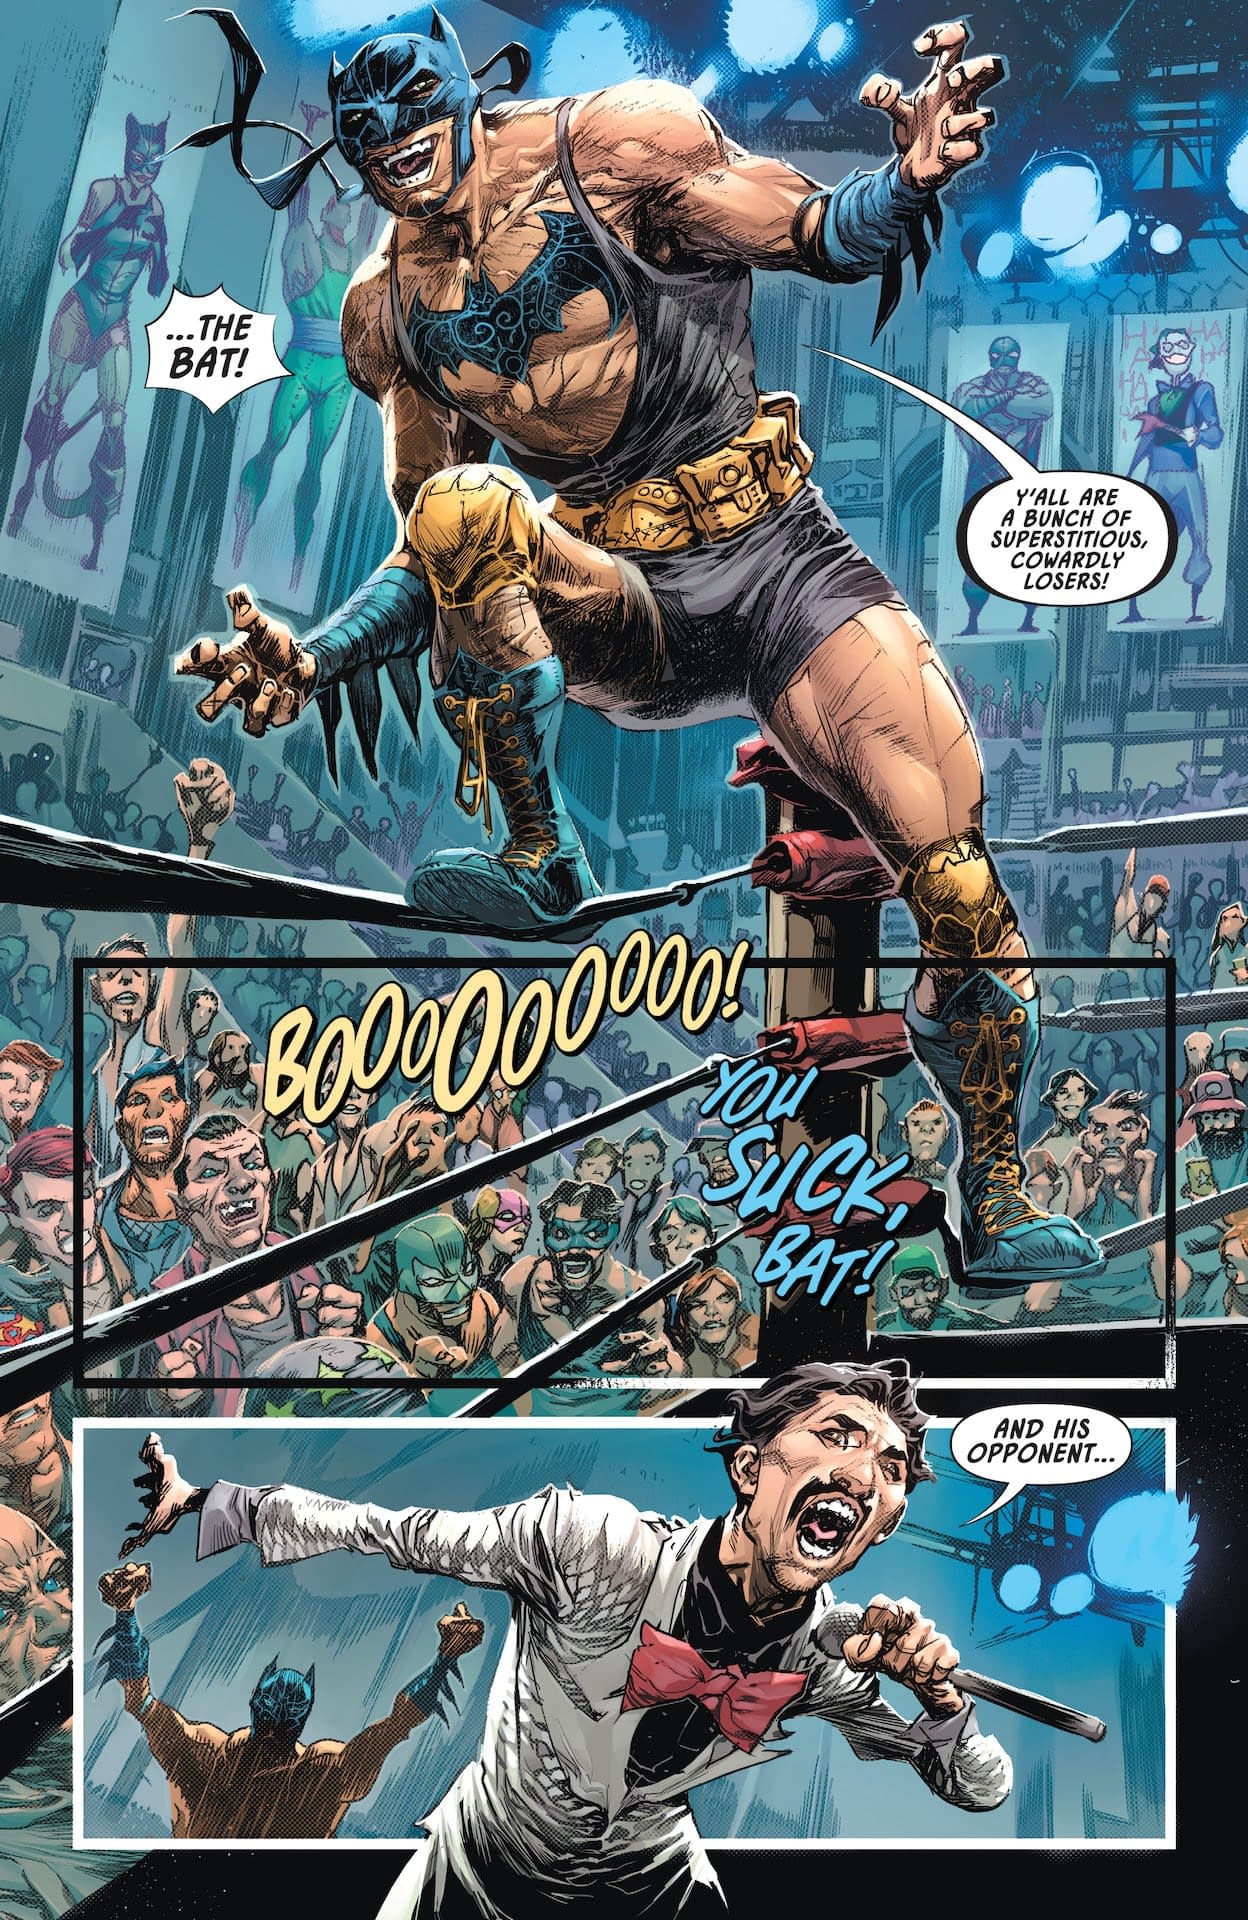 Batman: One Bad Day - Bane #1 Preview: Could Bruce Wayne Buy WWE?